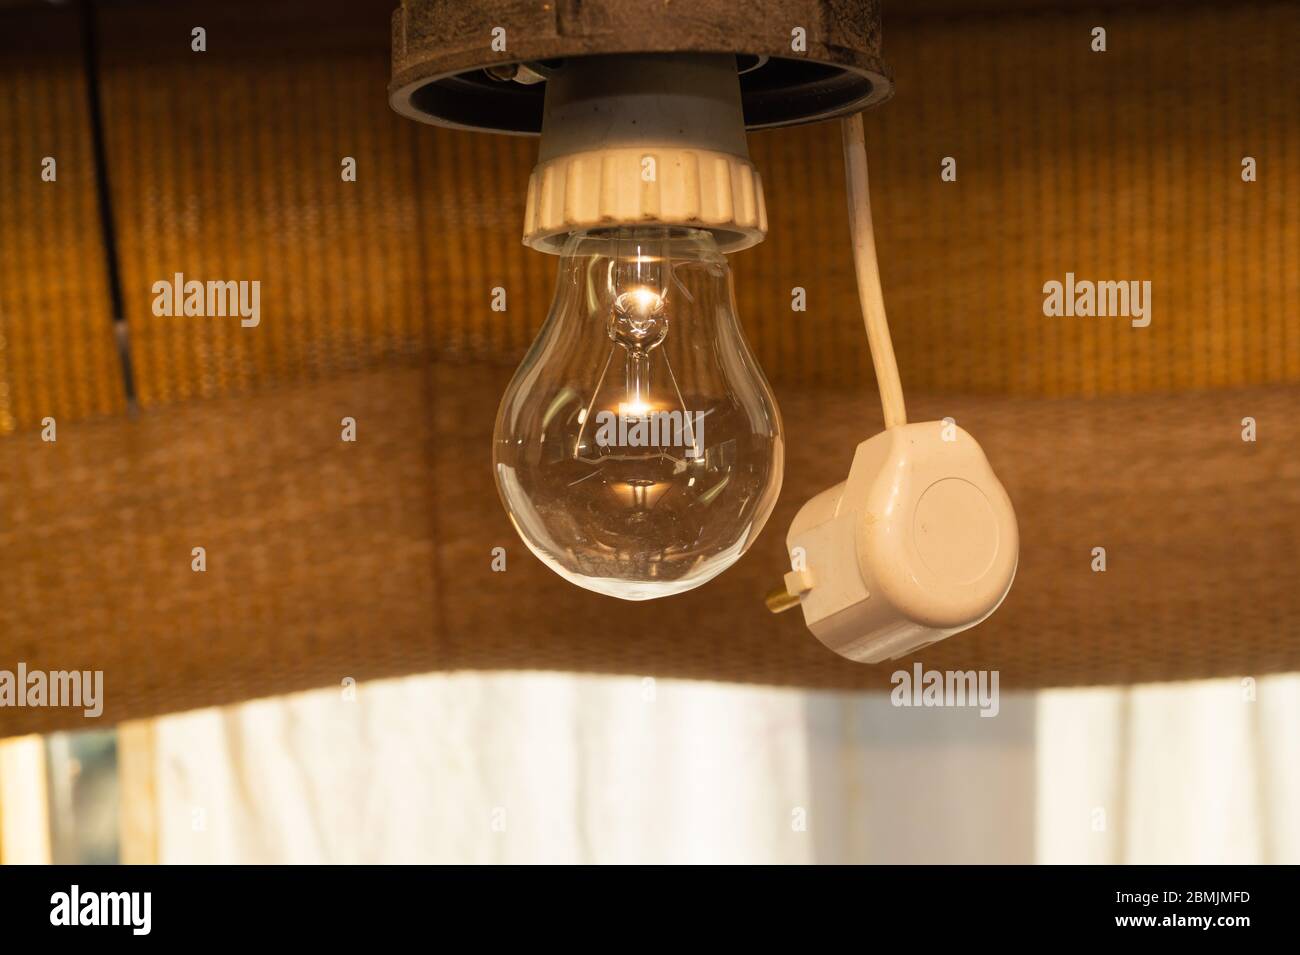 Incandescent lamp. hanging light bulb and electric plug Stock Photo